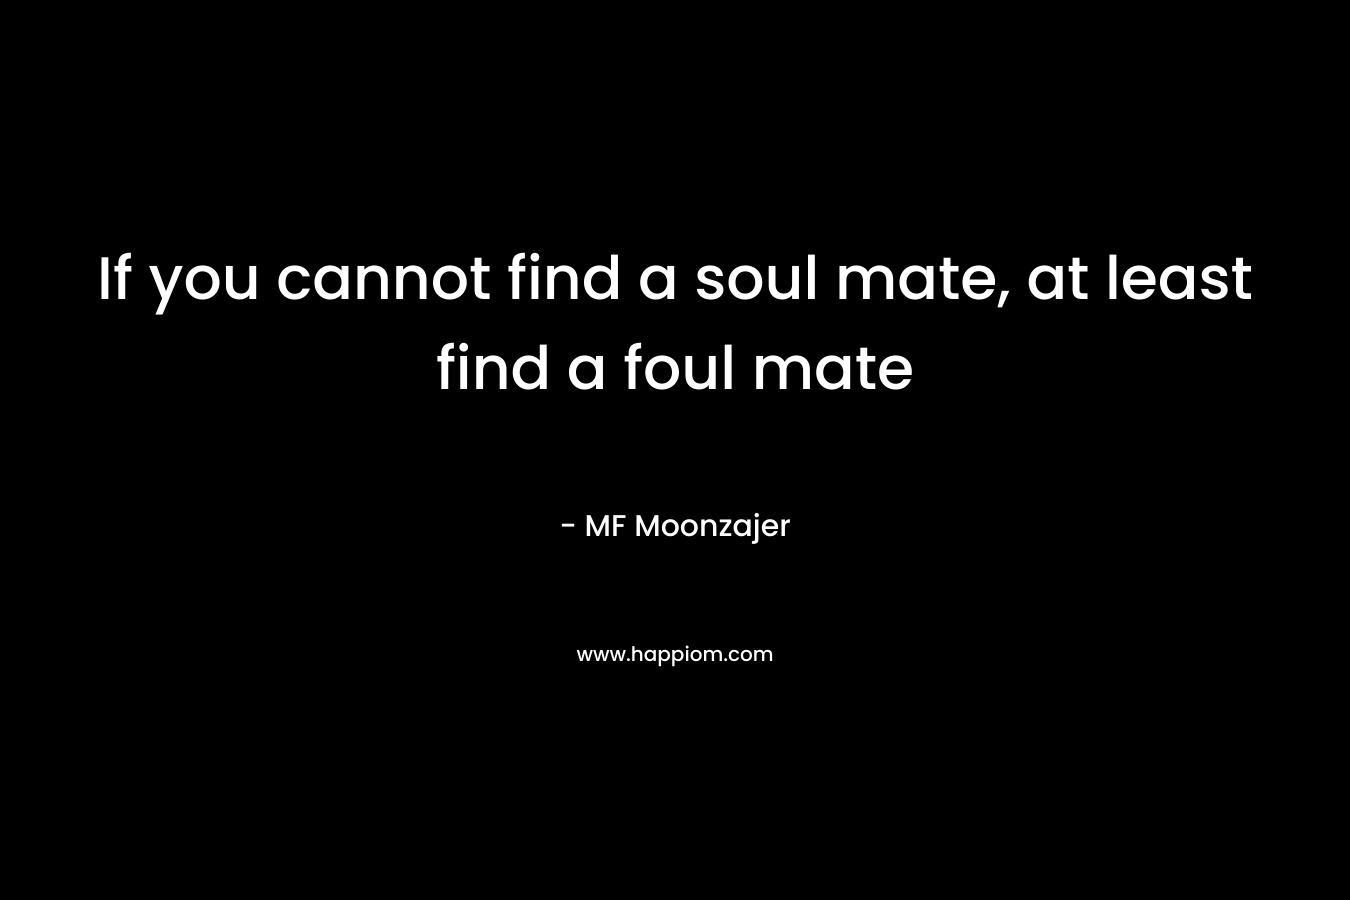 If you cannot find a soul mate, at least find a foul mate